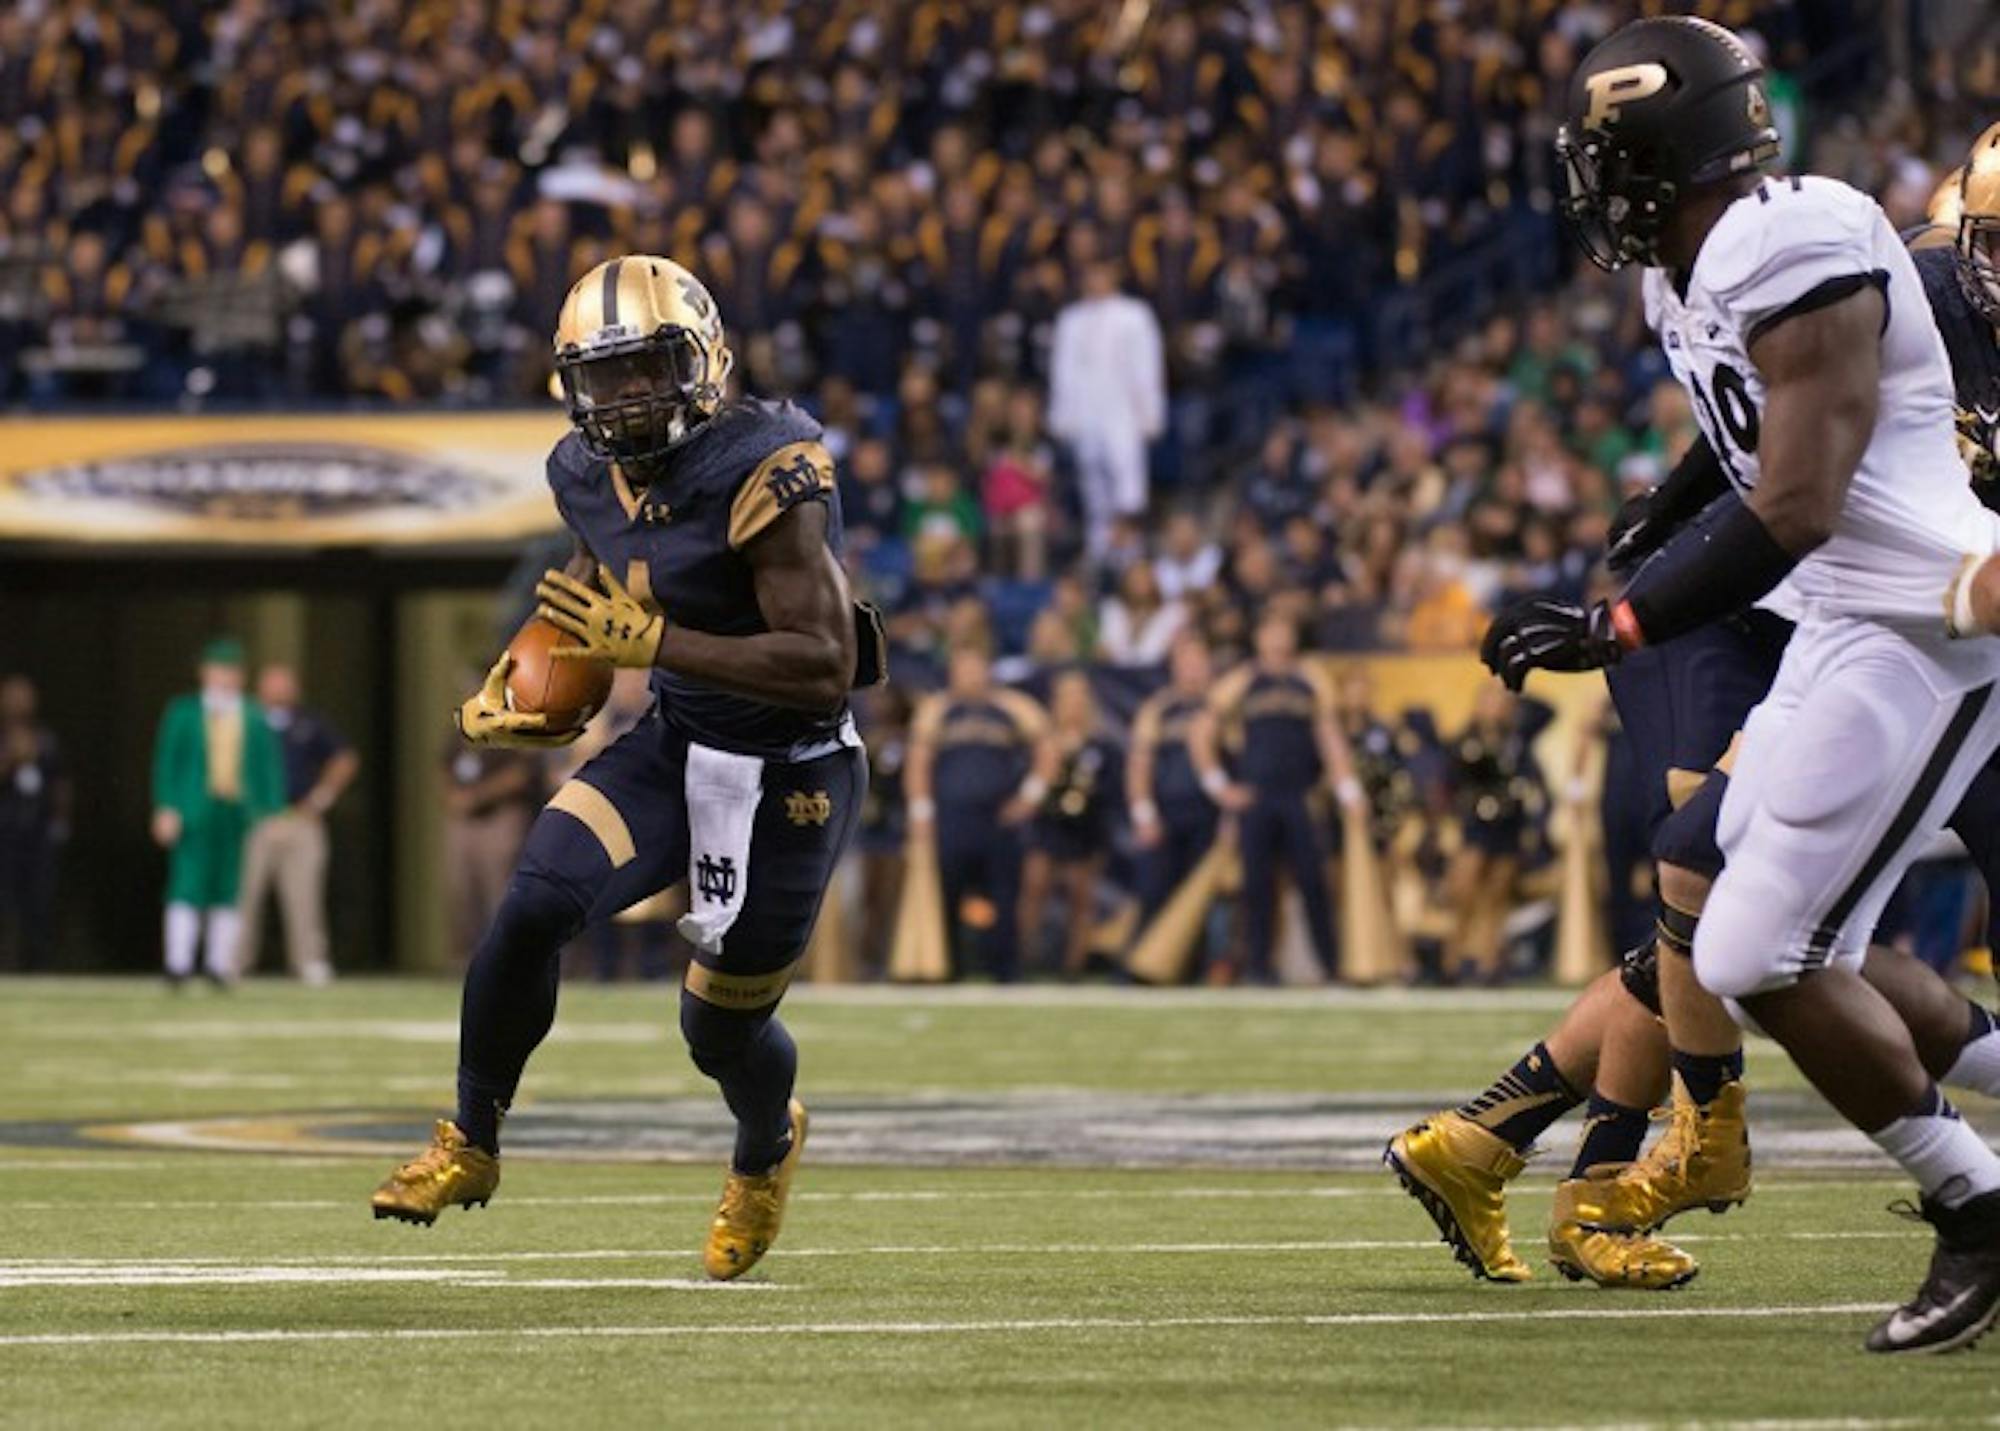 Sophomore running back Greg Bryant carries the ball in the 30-14 win against Purdue at Lucas Oil Stadium on Saturday that gave Notre Dame a 3-0 record.